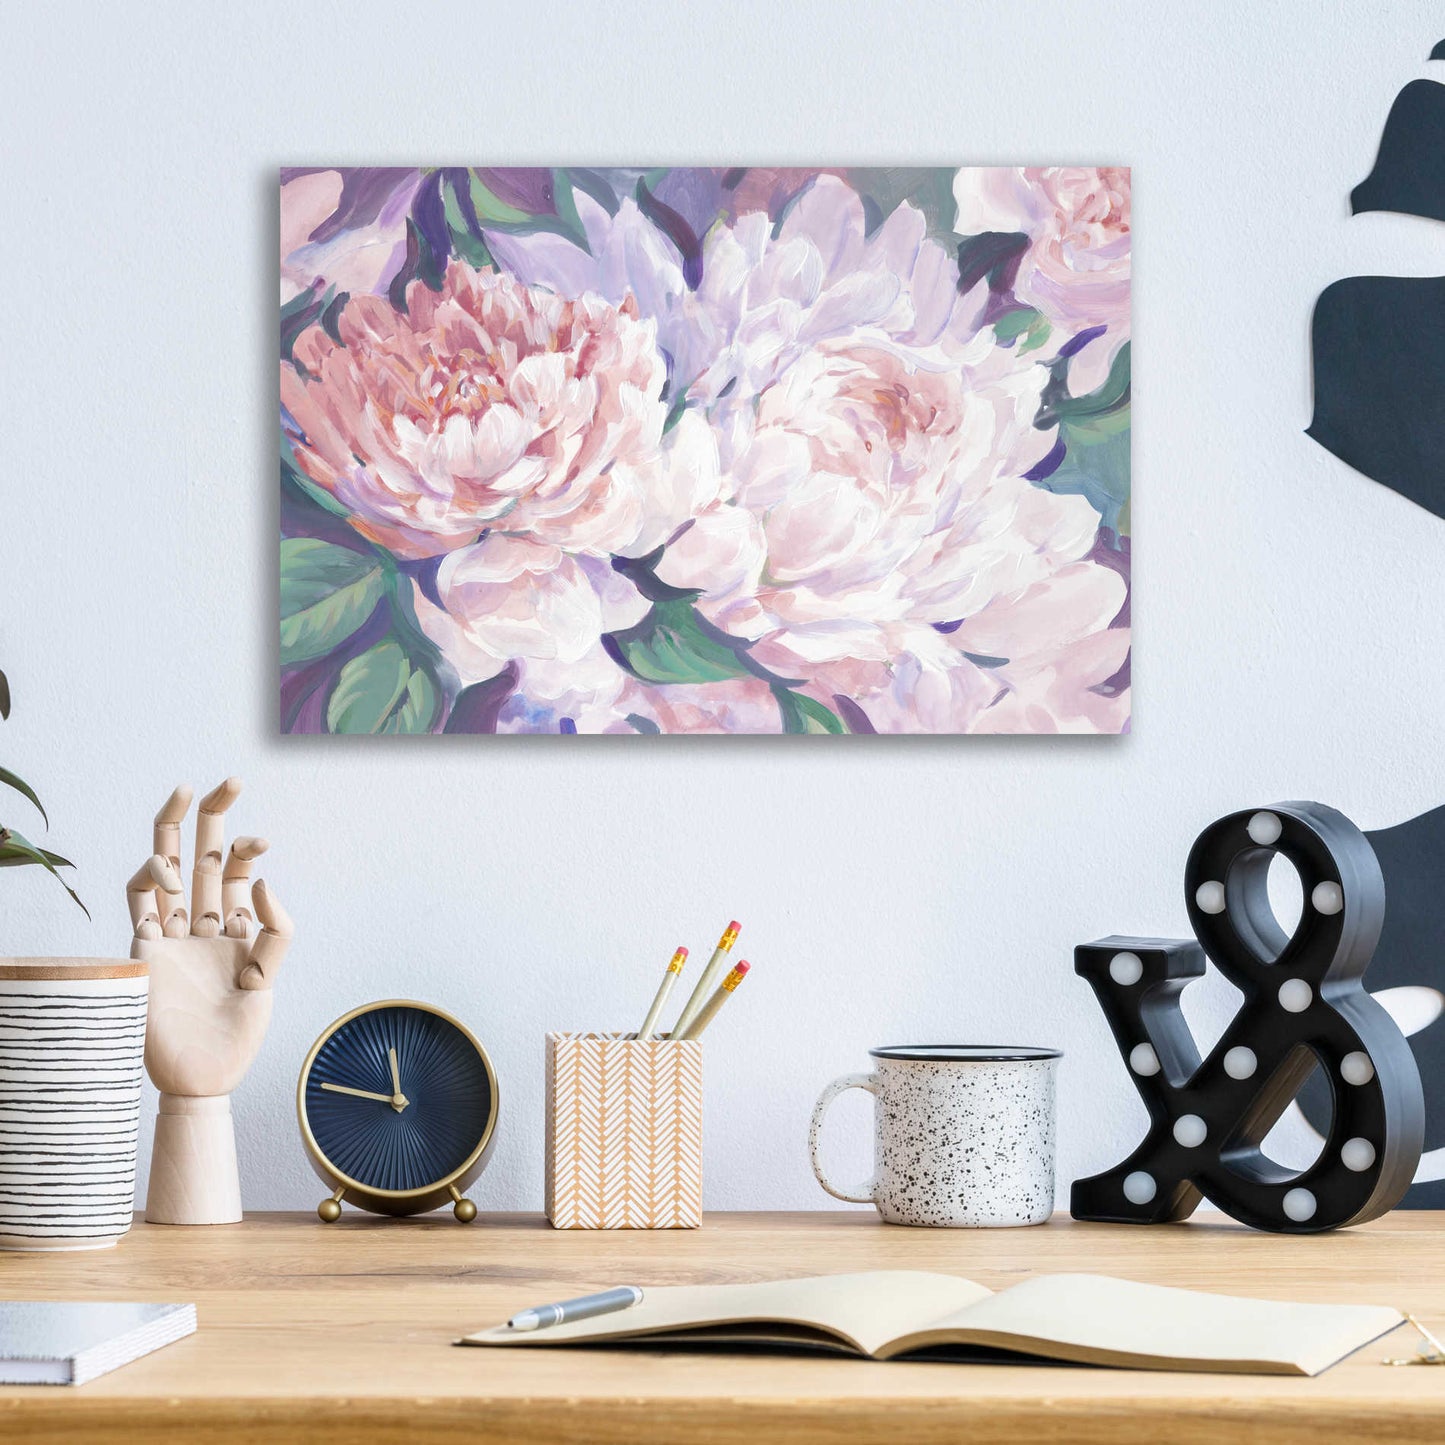 Epic Art 'Peonies in Bloom I' by Tim O'Toole, Acrylic Glass Wall Art,16x12